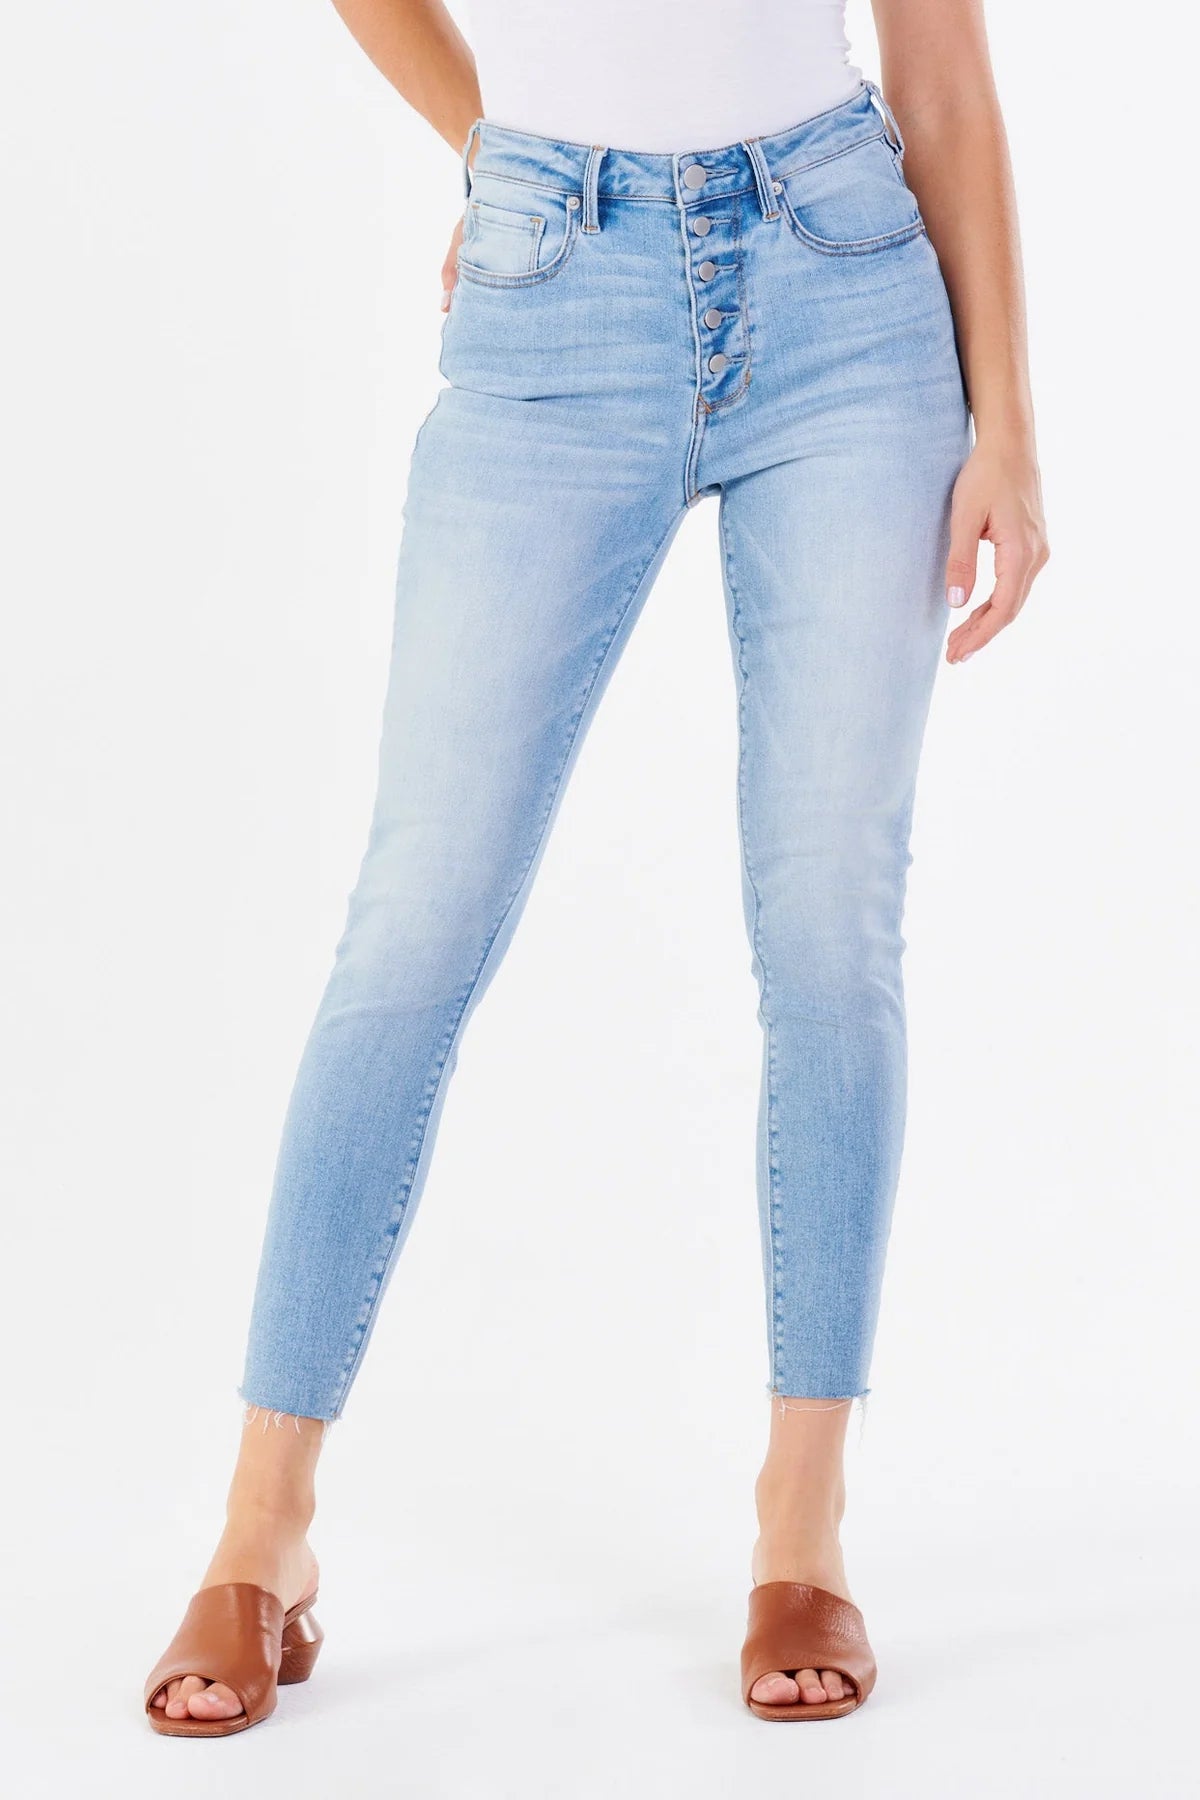 Downtown Olivia Jeans